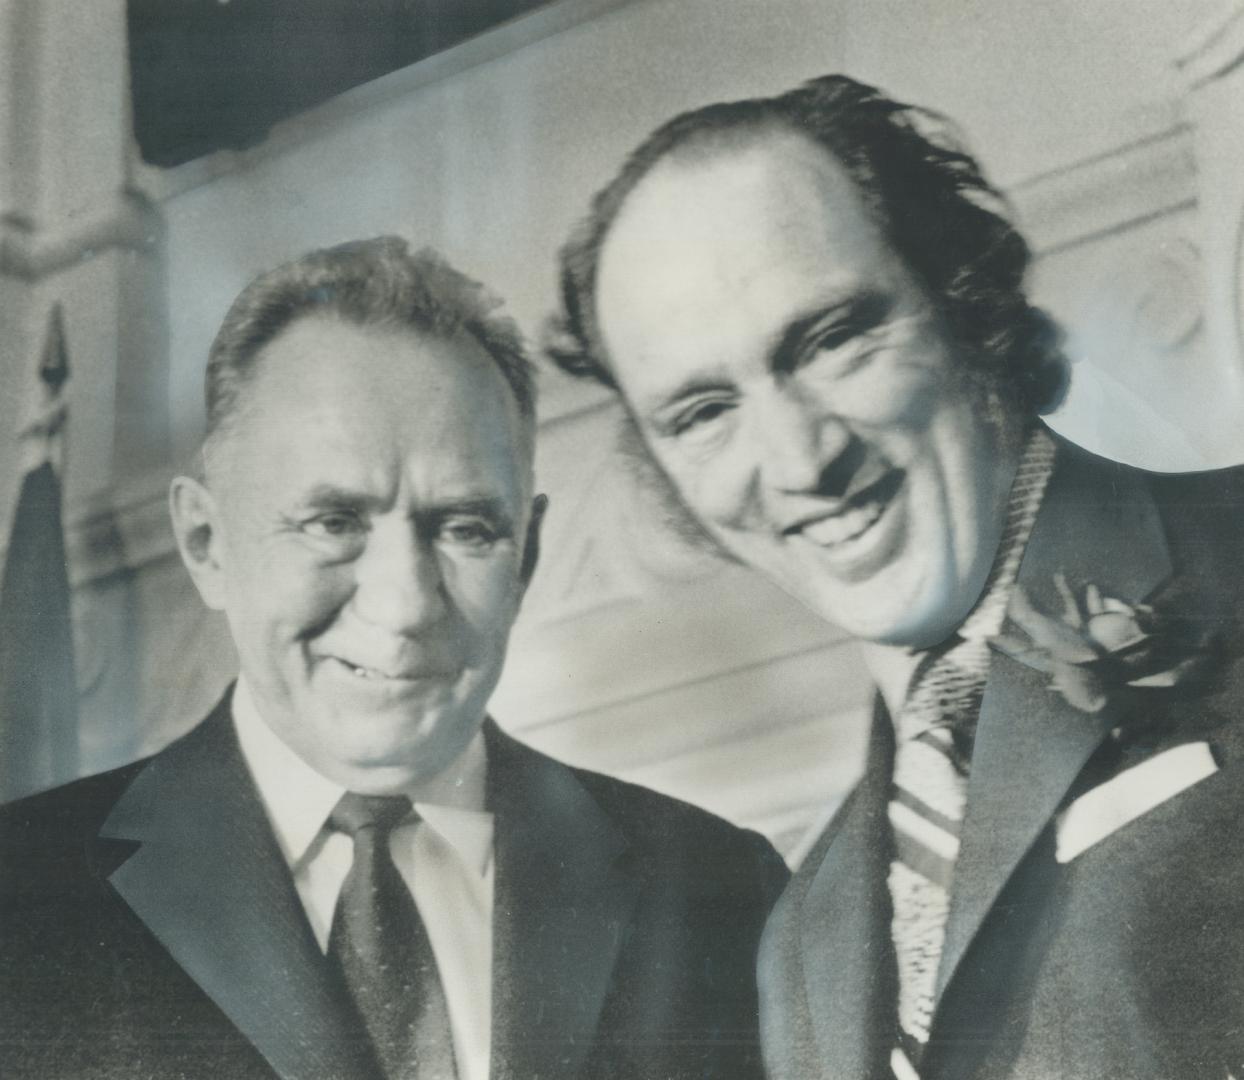 Wearing a smile-and-a-half, a full one on the face of Prime Minister Pierre Trudeau, a half smile on the face of Soviet Premier Alexei Kosygin, the two leaders stand together today in the Parliament Buildings after signing agreement on exchange visits between the two nations, then toasting the pact with champagne